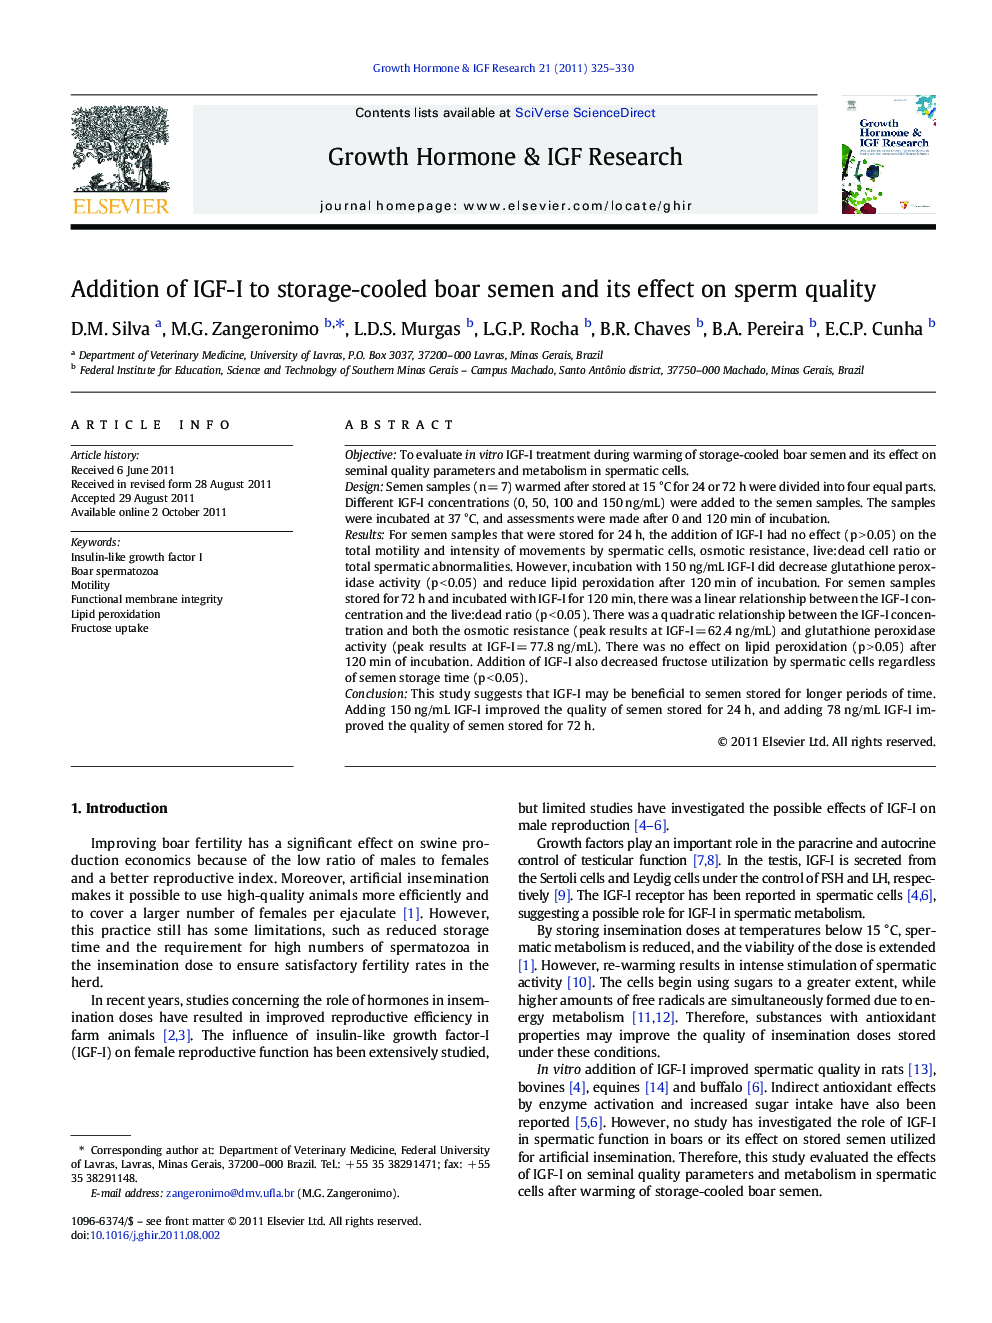 Addition of IGF-I to storage-cooled boar semen and its effect on sperm quality